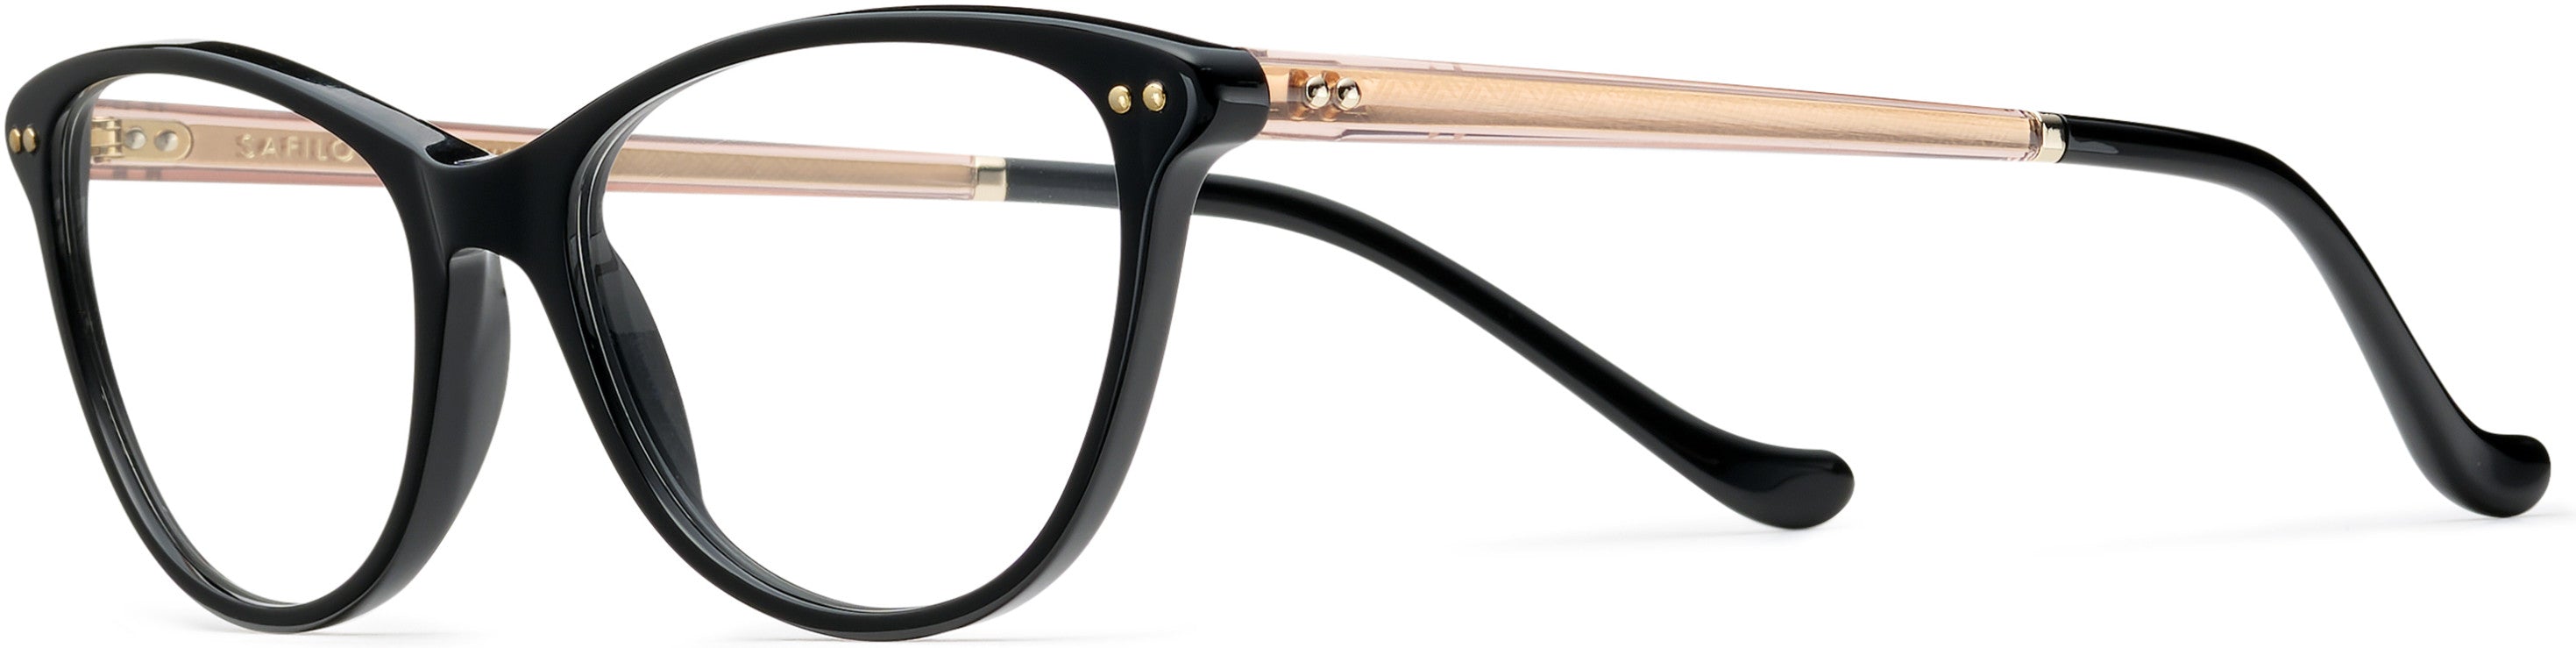 Safilo 2.0 Tratto 09 Cat Eye/butterfly Eyeglasses 03H2-03H2  Black Pink (00 Demo Lens)